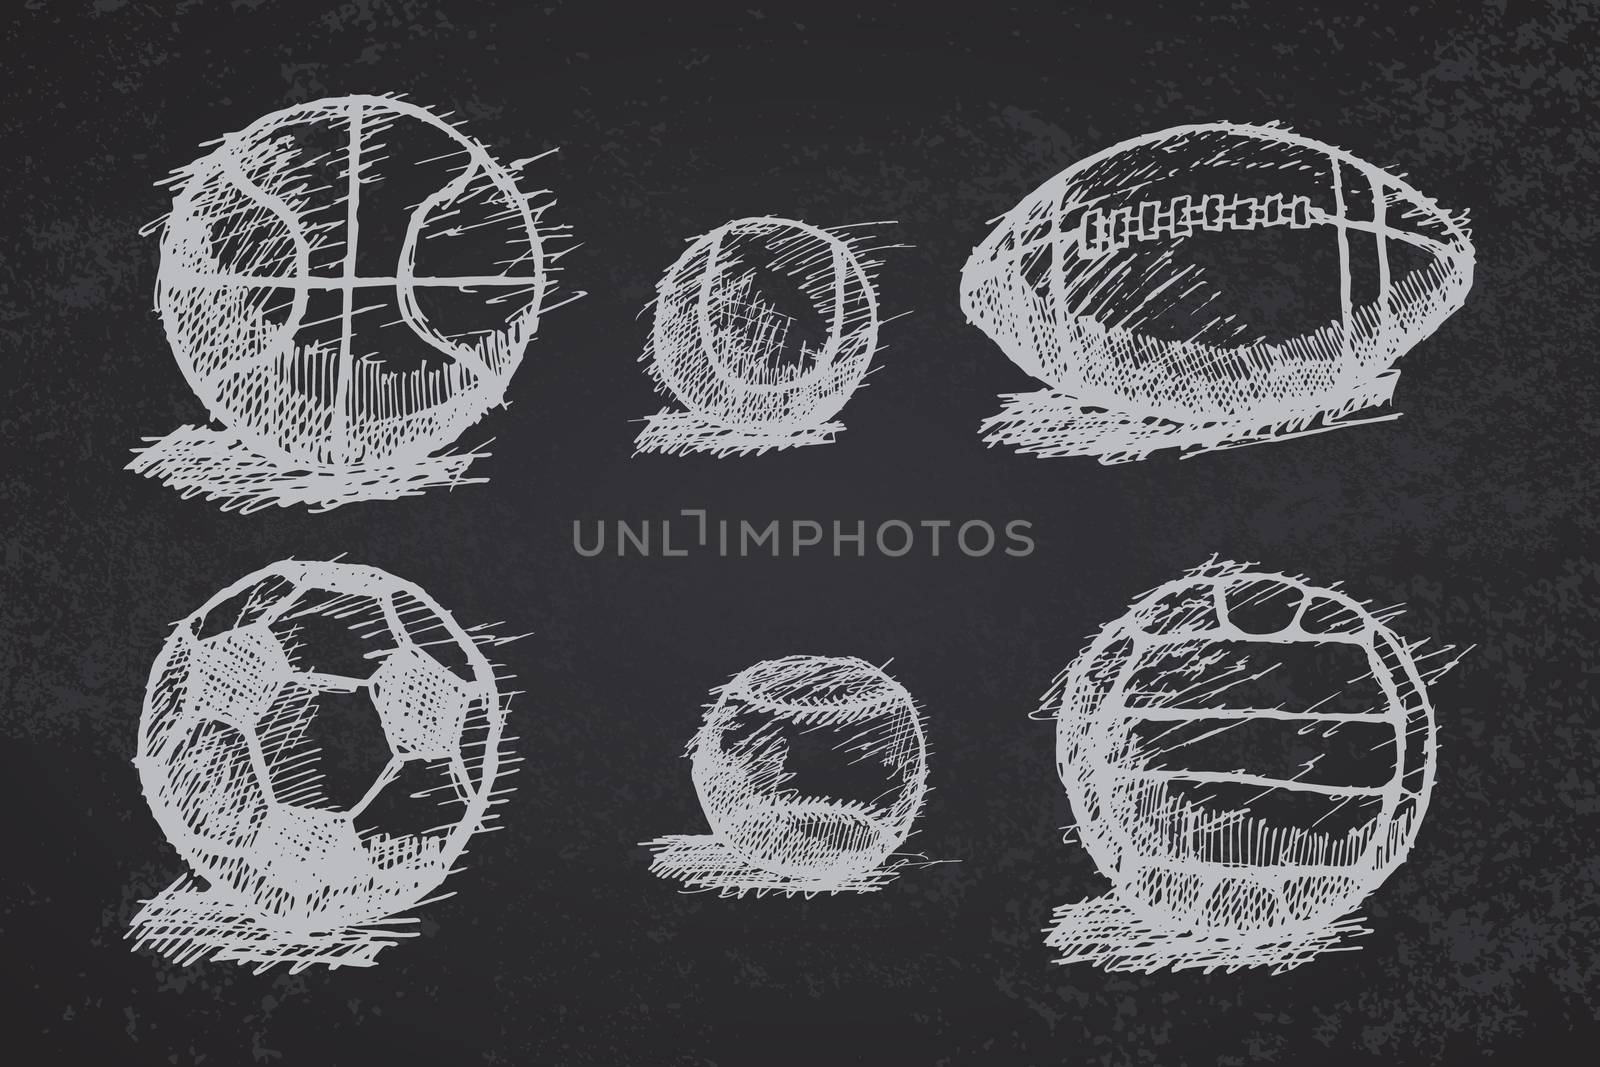 Ball sketch set with shadow on the ground on blackboard by Lemon_workshop